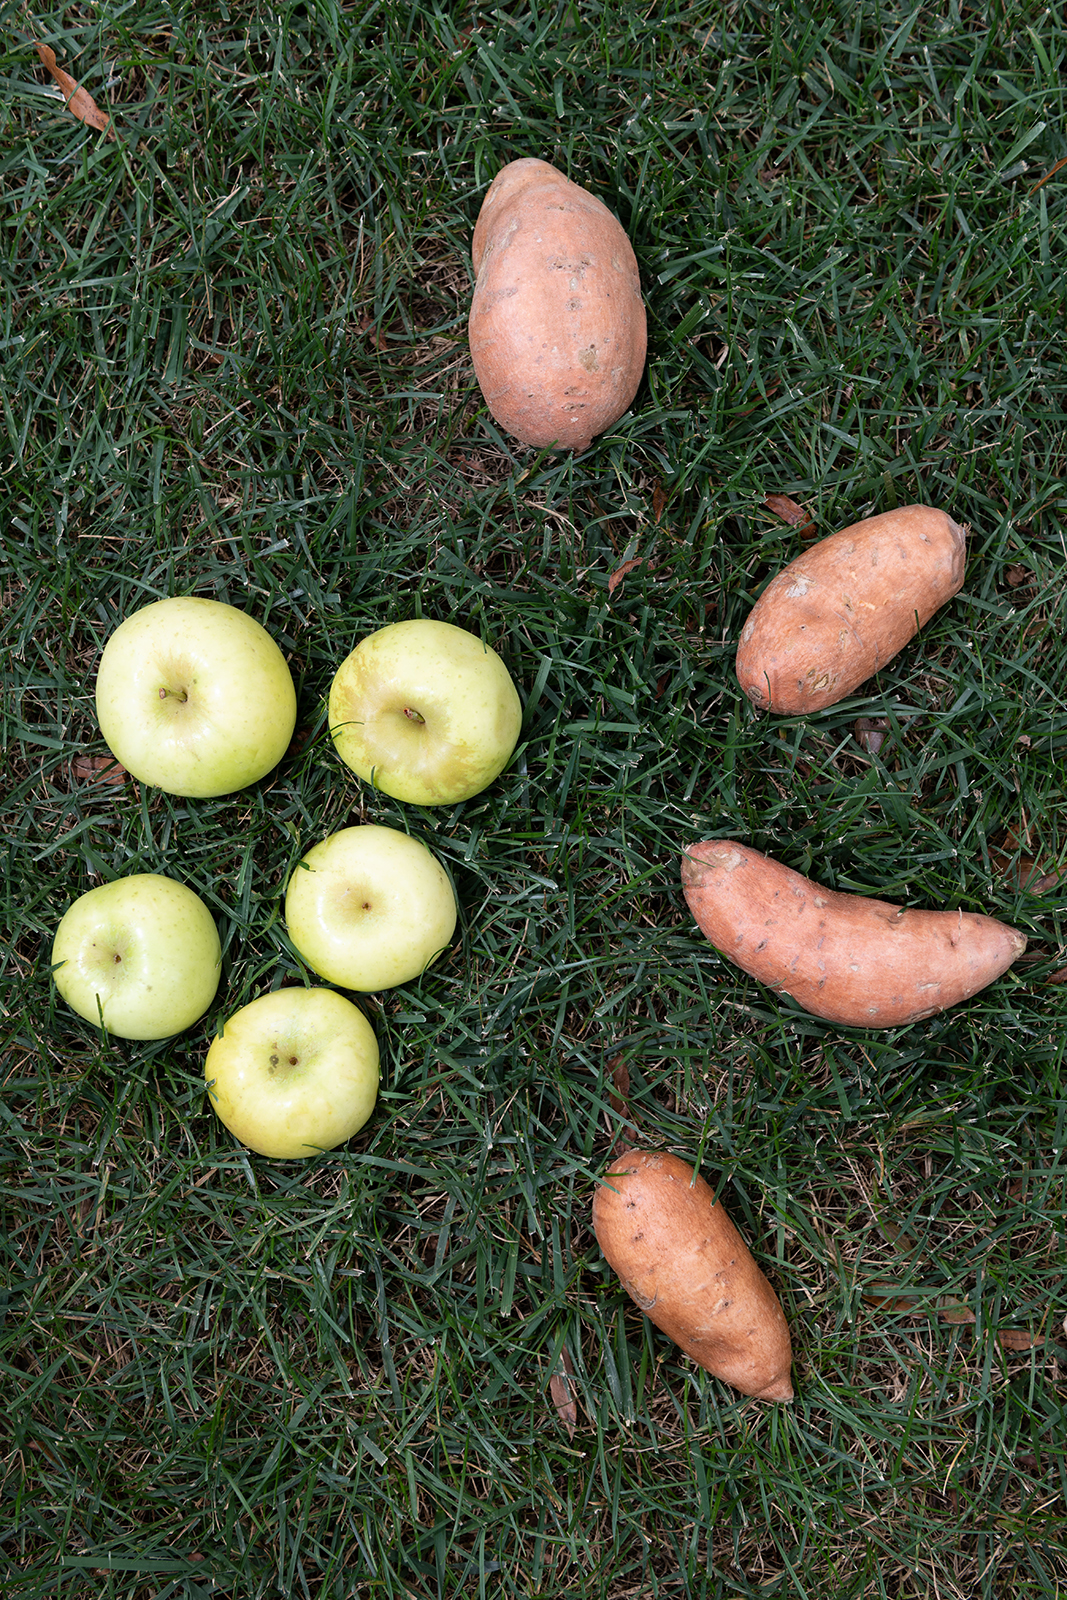 Apples and sweet potatoes were both in season during the September share.
Photo by Allison Carter